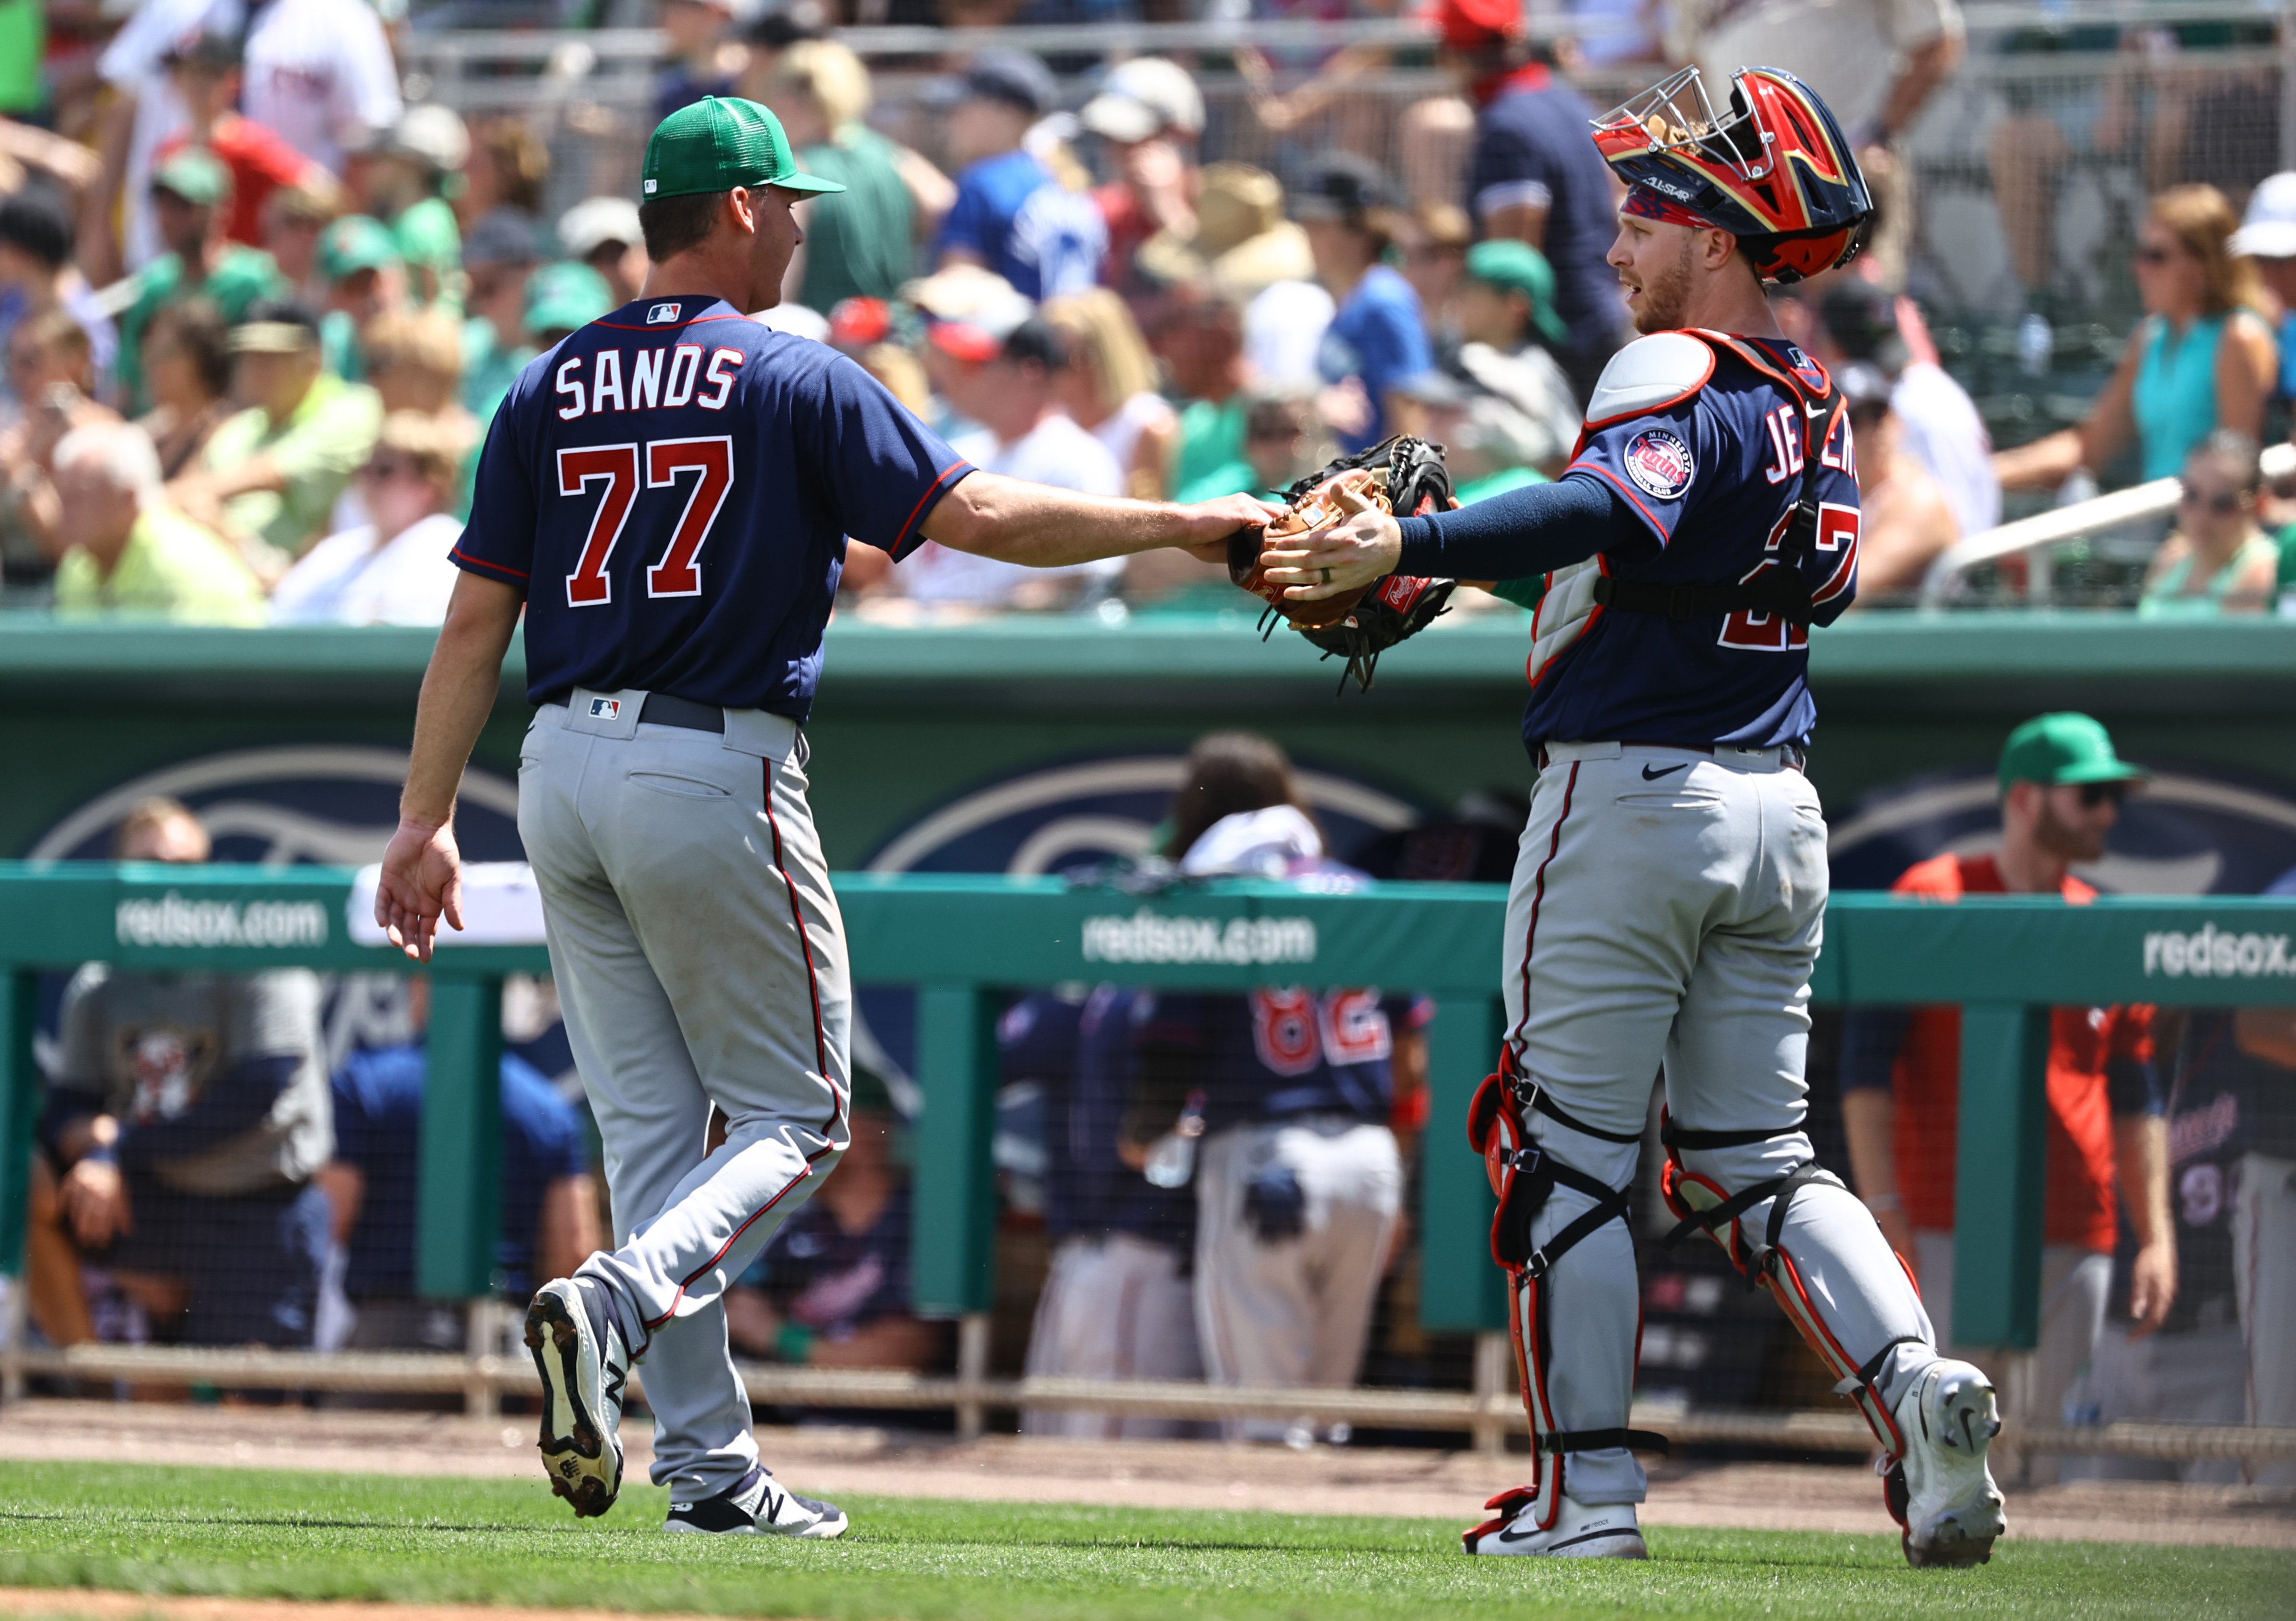 Bullpen BS - mikelink45's Blog - Twins Daily